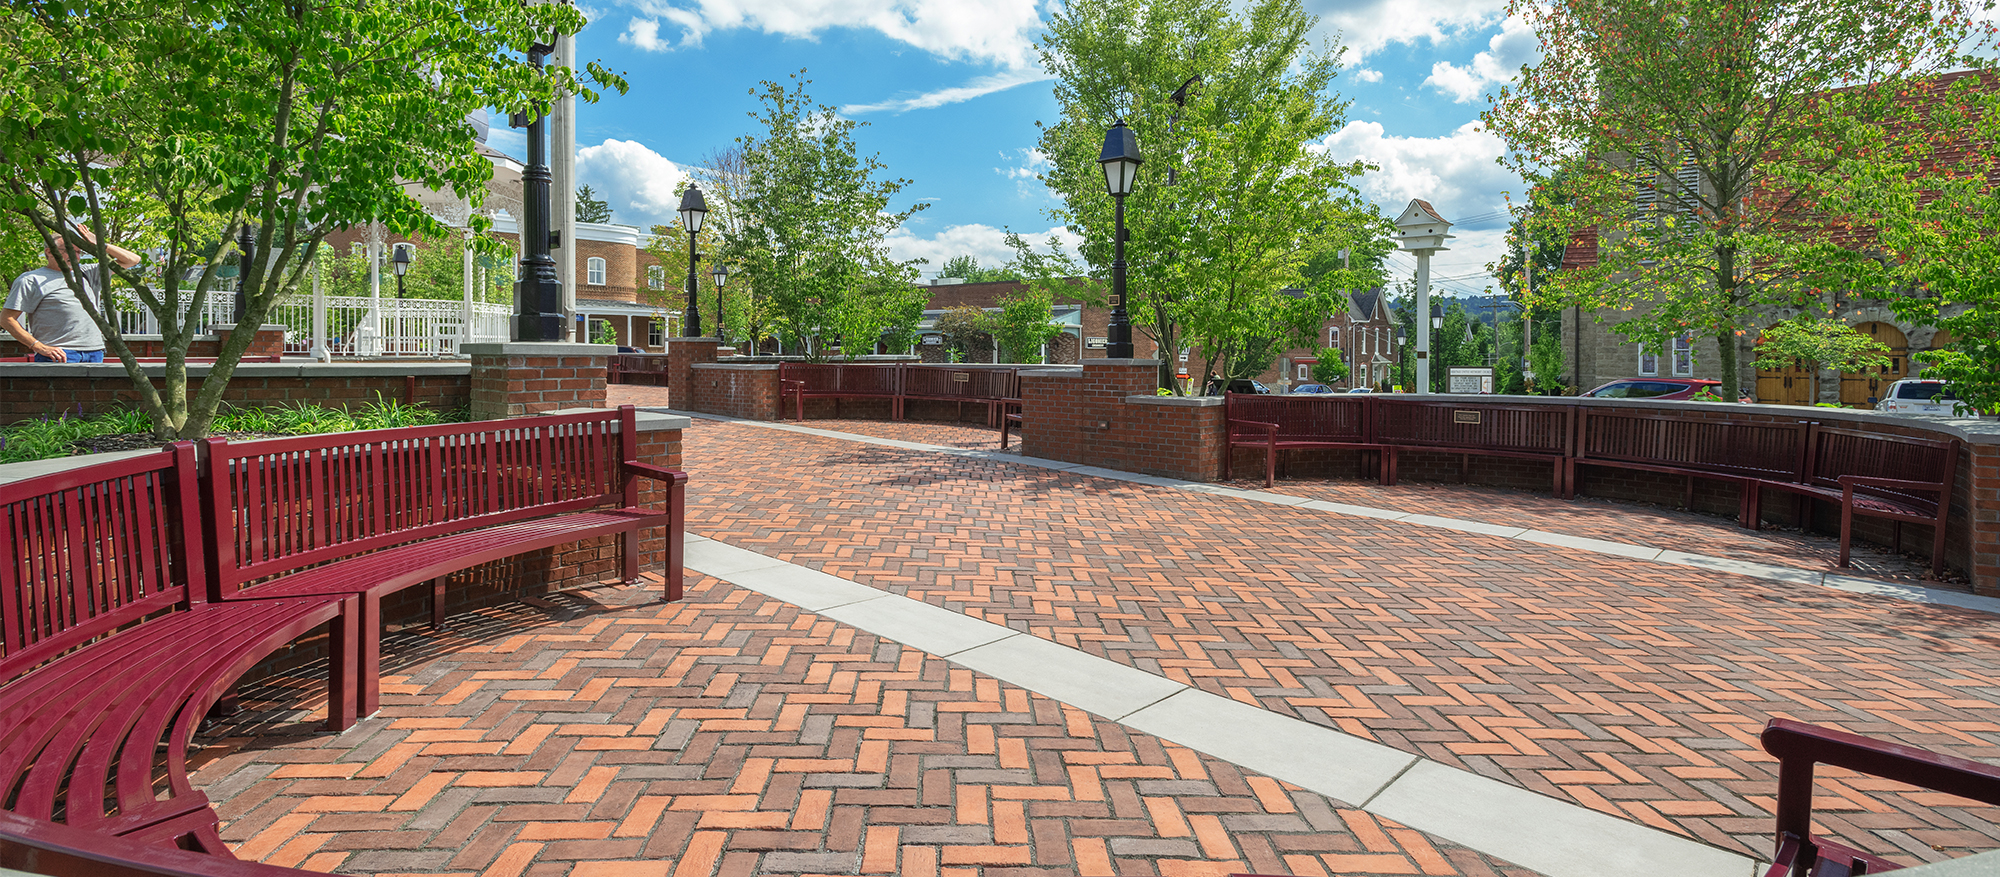 Rounded Burgundy benches in a tree-lined walled plaza made with Town Hall pavers in shades of red with gray slab stripes running through. 